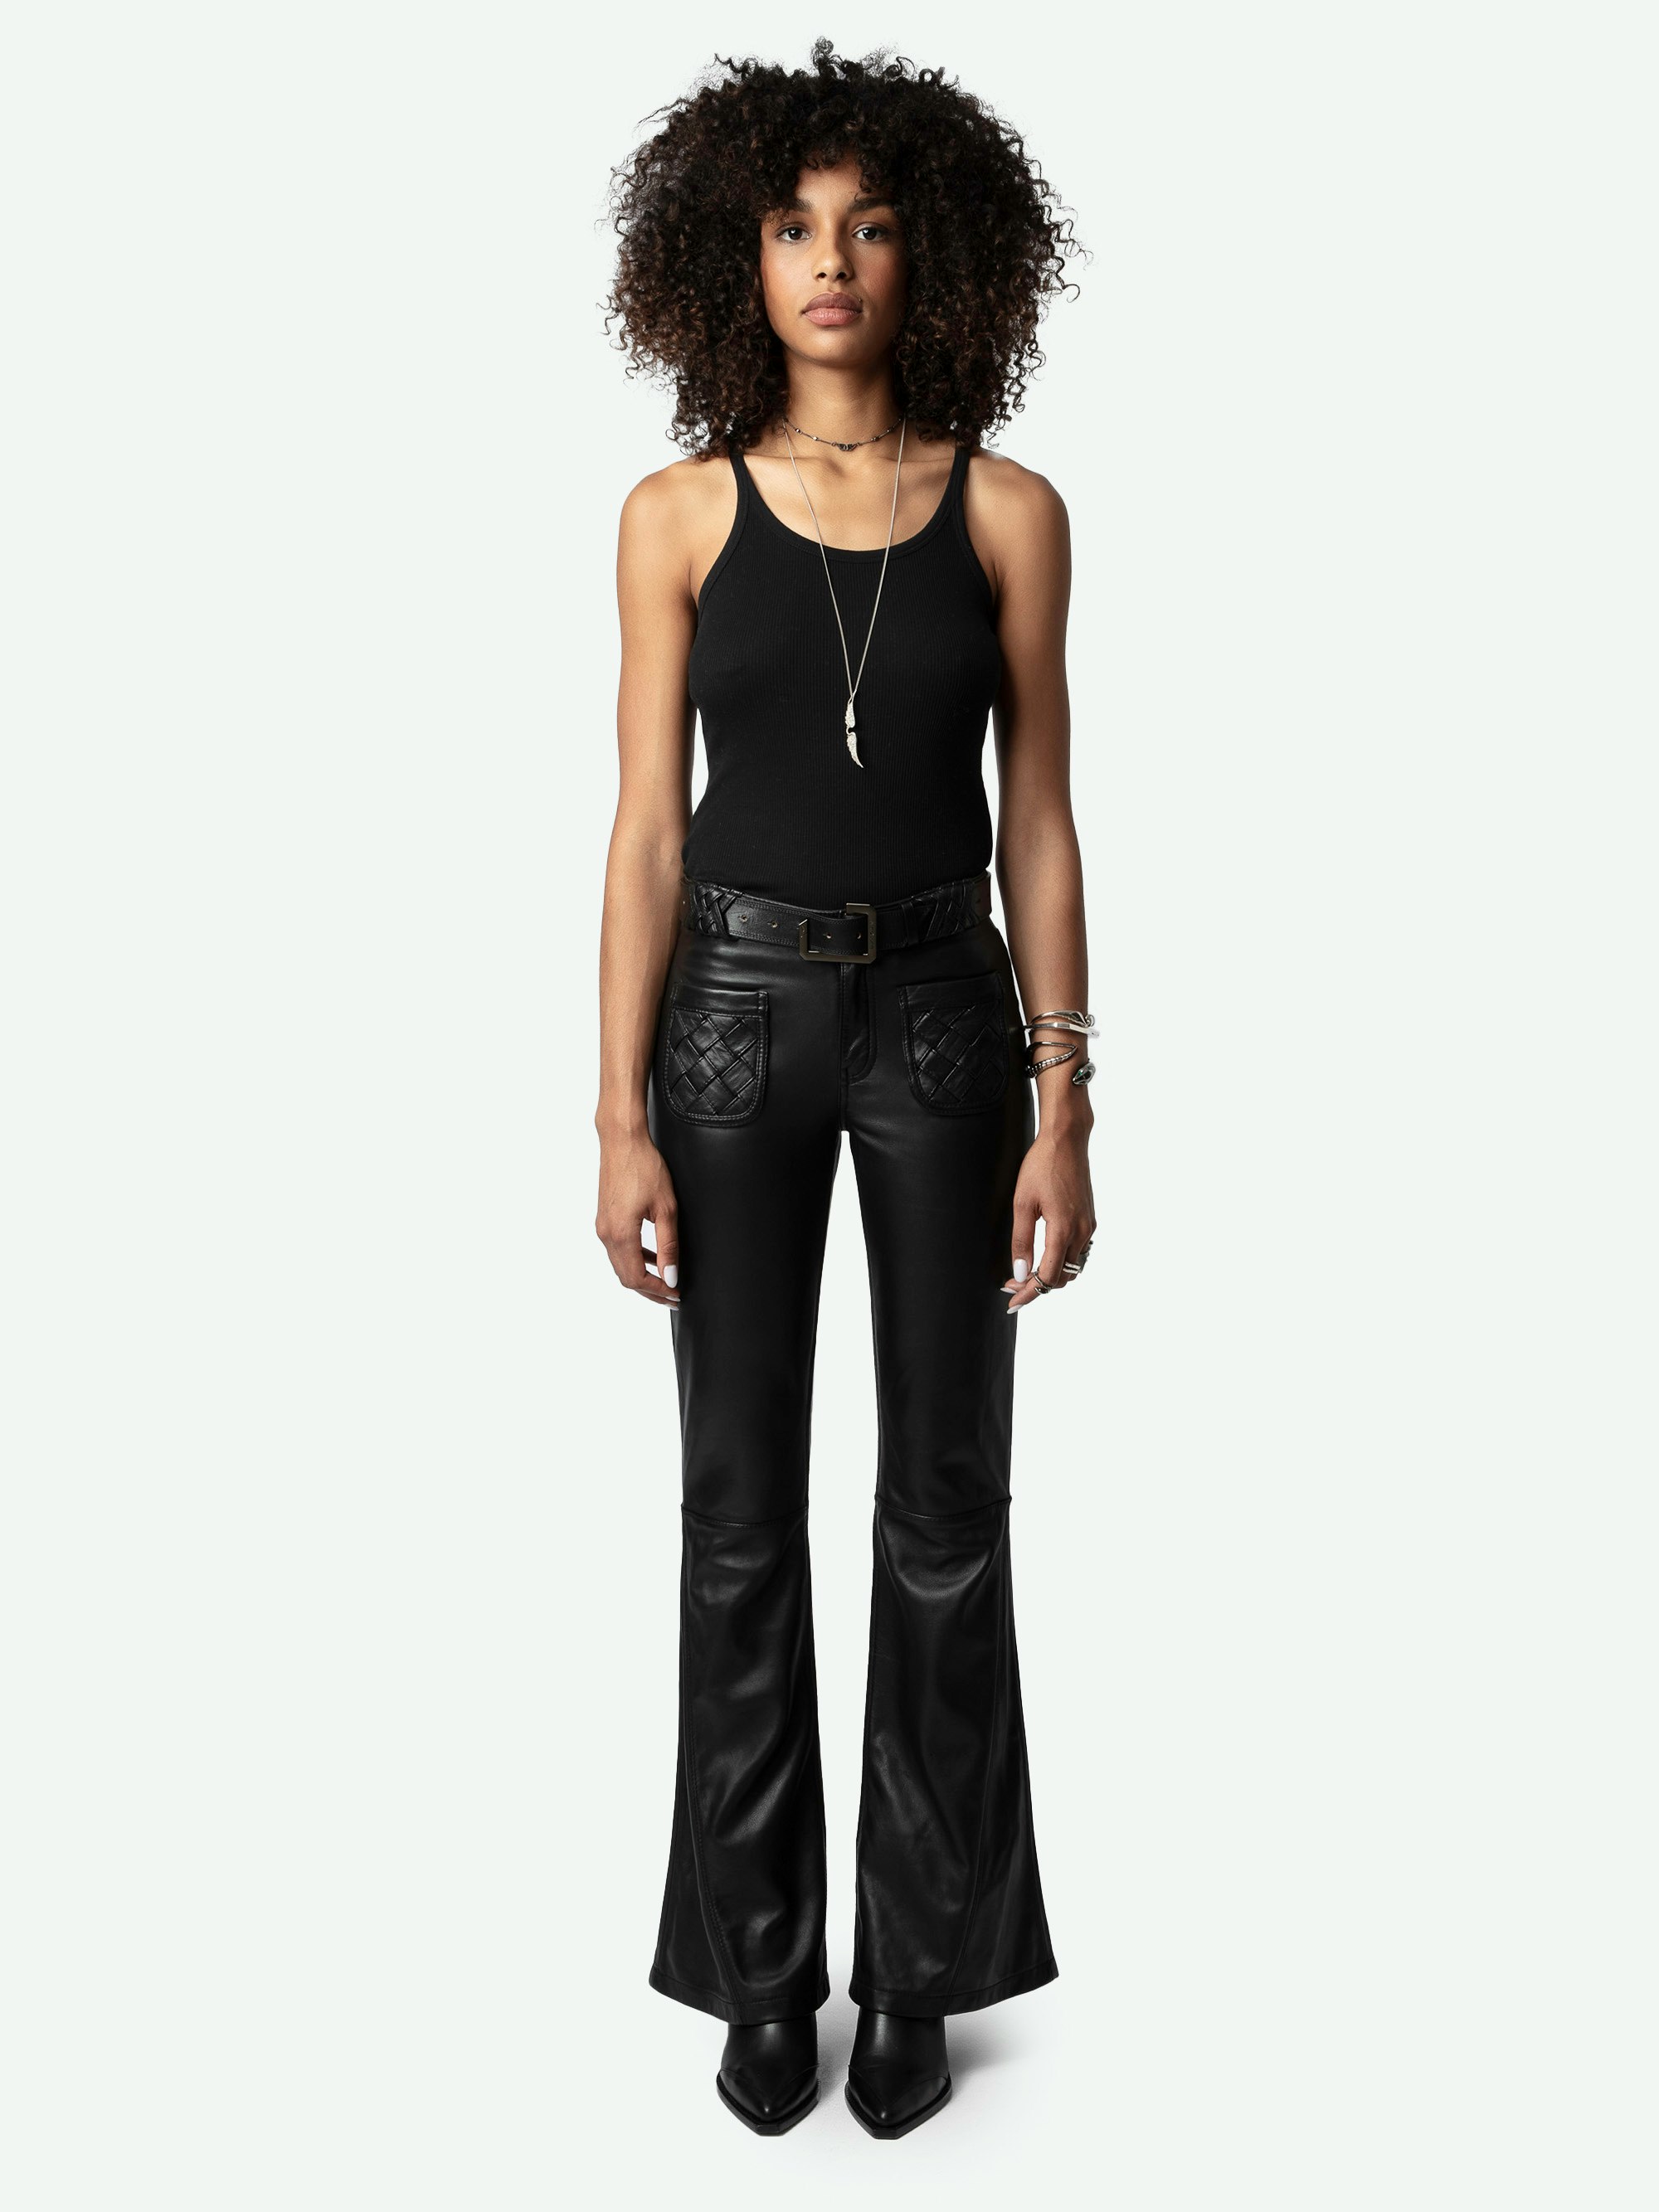 Ecume Leather Trousers - Flared trousers in smooth black leather with braided detailing on the pockets and belt loops.